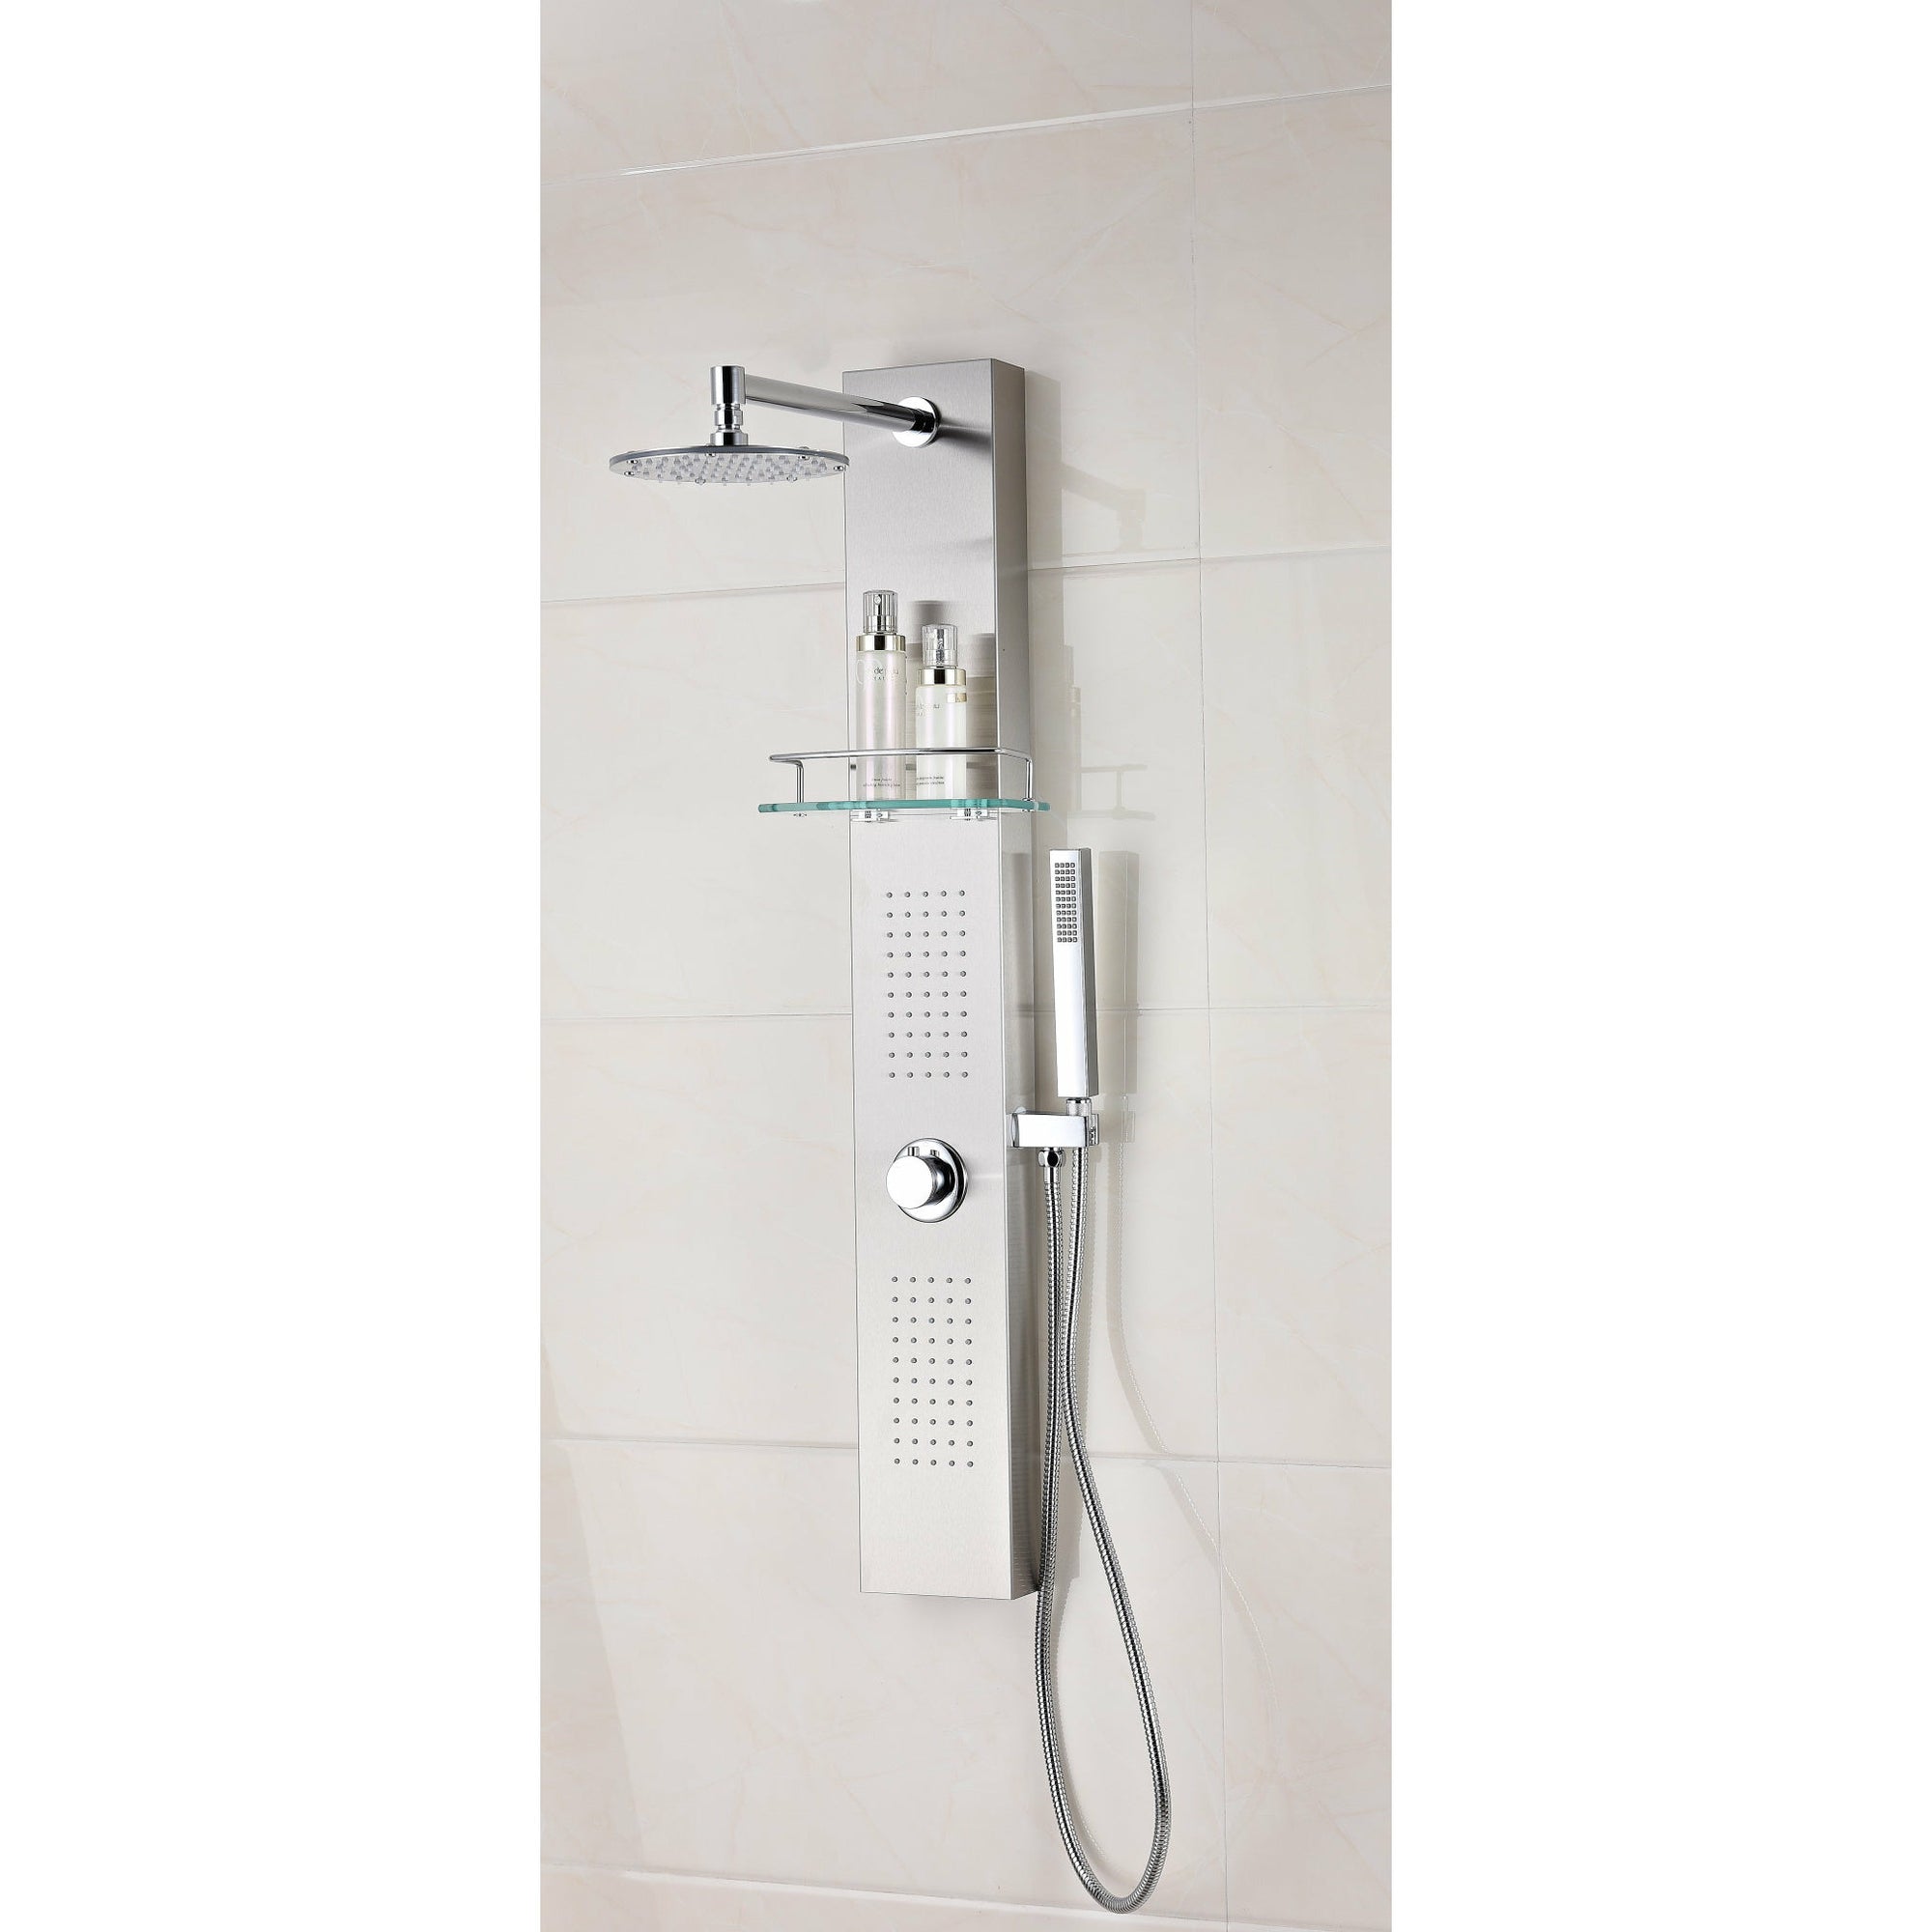 Anzzi Coastal 44 Inch Full Body Shower Panel with Deco-Glass Shampoo Shelf, Swiveling Crested Heavy Rain Shower Head, Shower Control Knob, Two Acu-stream Vector Massage Body Jet Sets and Euro-grip Hand Sprayer in Brushed Steel SP-AZ075 - Vital Hydrotherapy